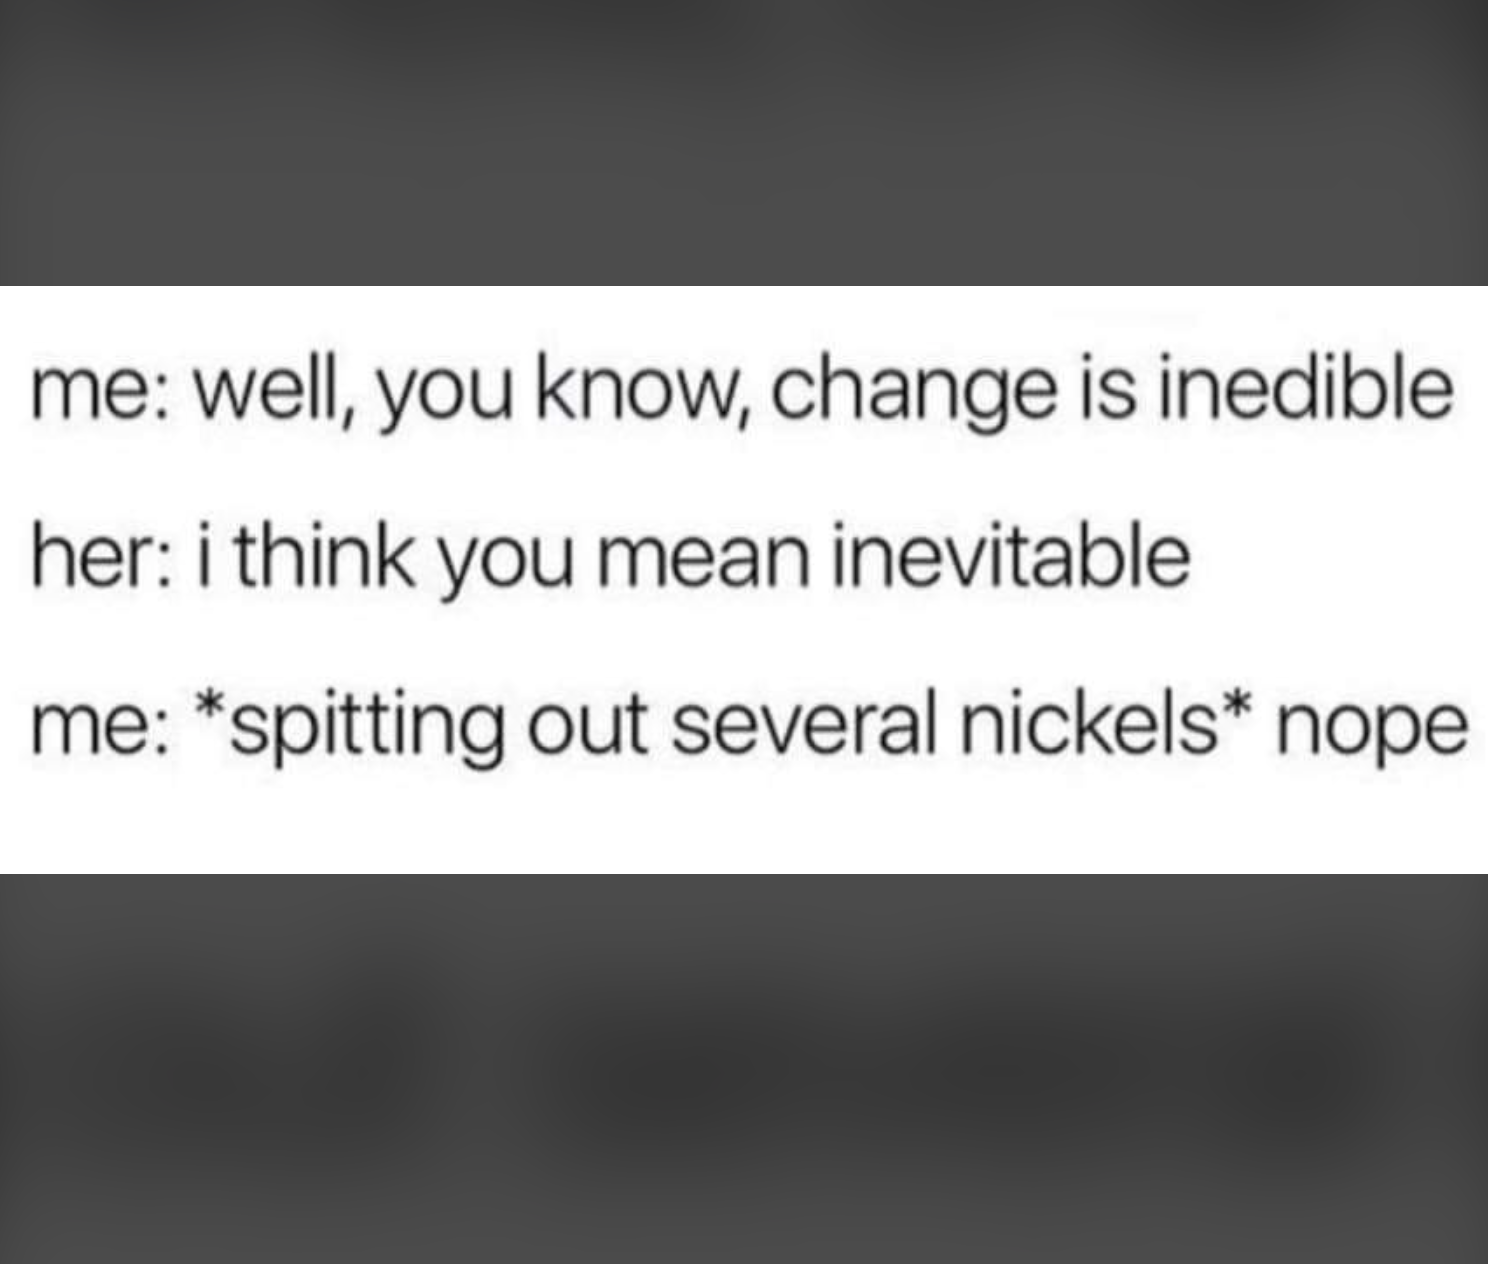 material - me well, you know, change is inedible her i think you mean inevitable me spitting out several nickels nope